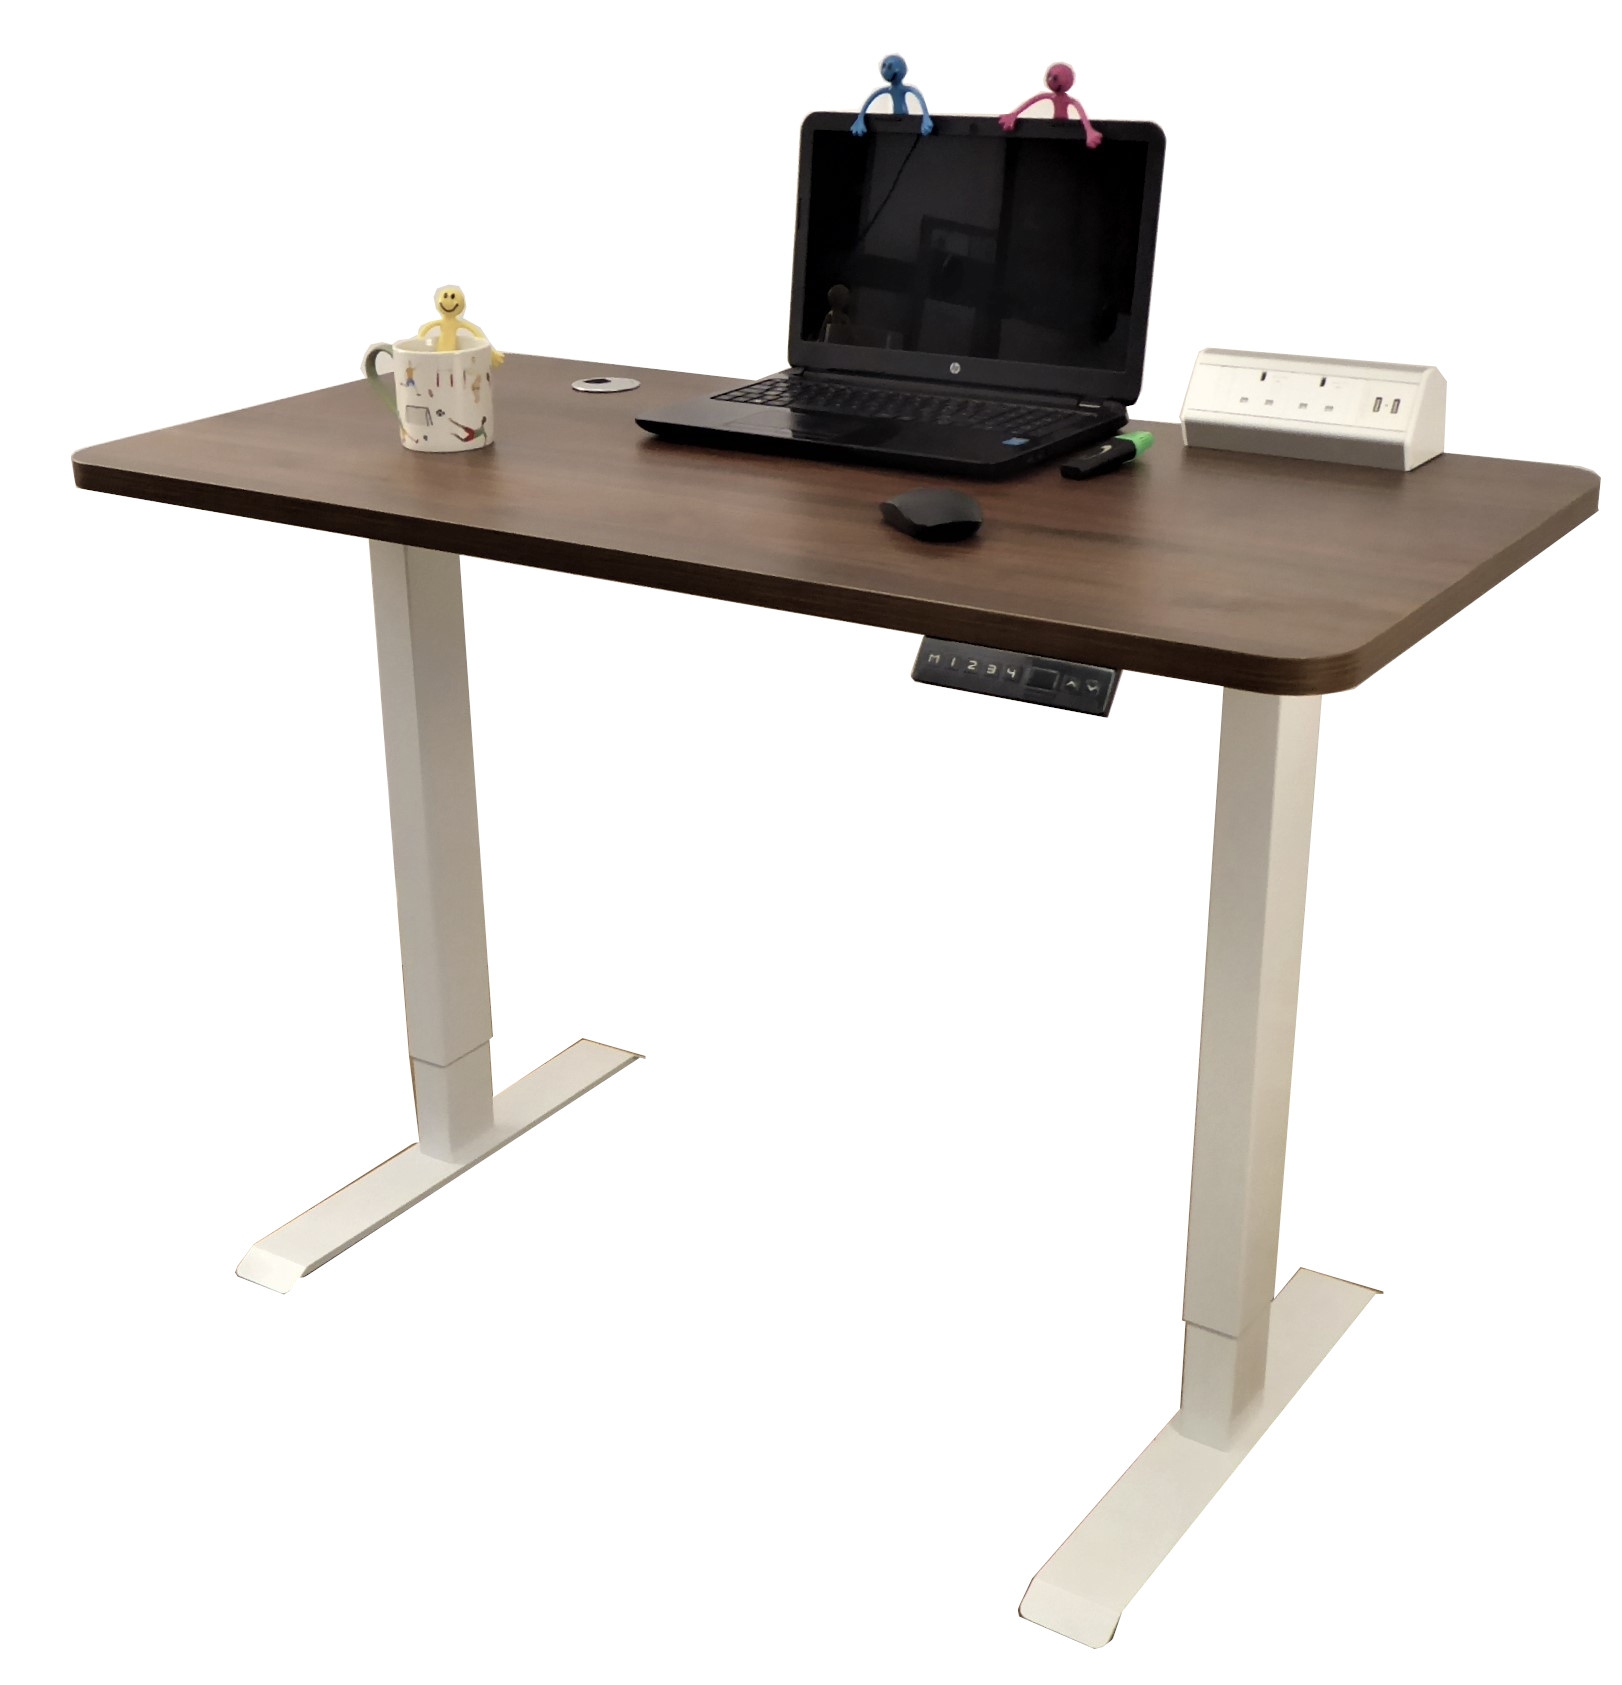 NEW Home Office Height Adjustable Desks 1200mm x 600mm Tops – White Frame NT33-2 – Up Standesk